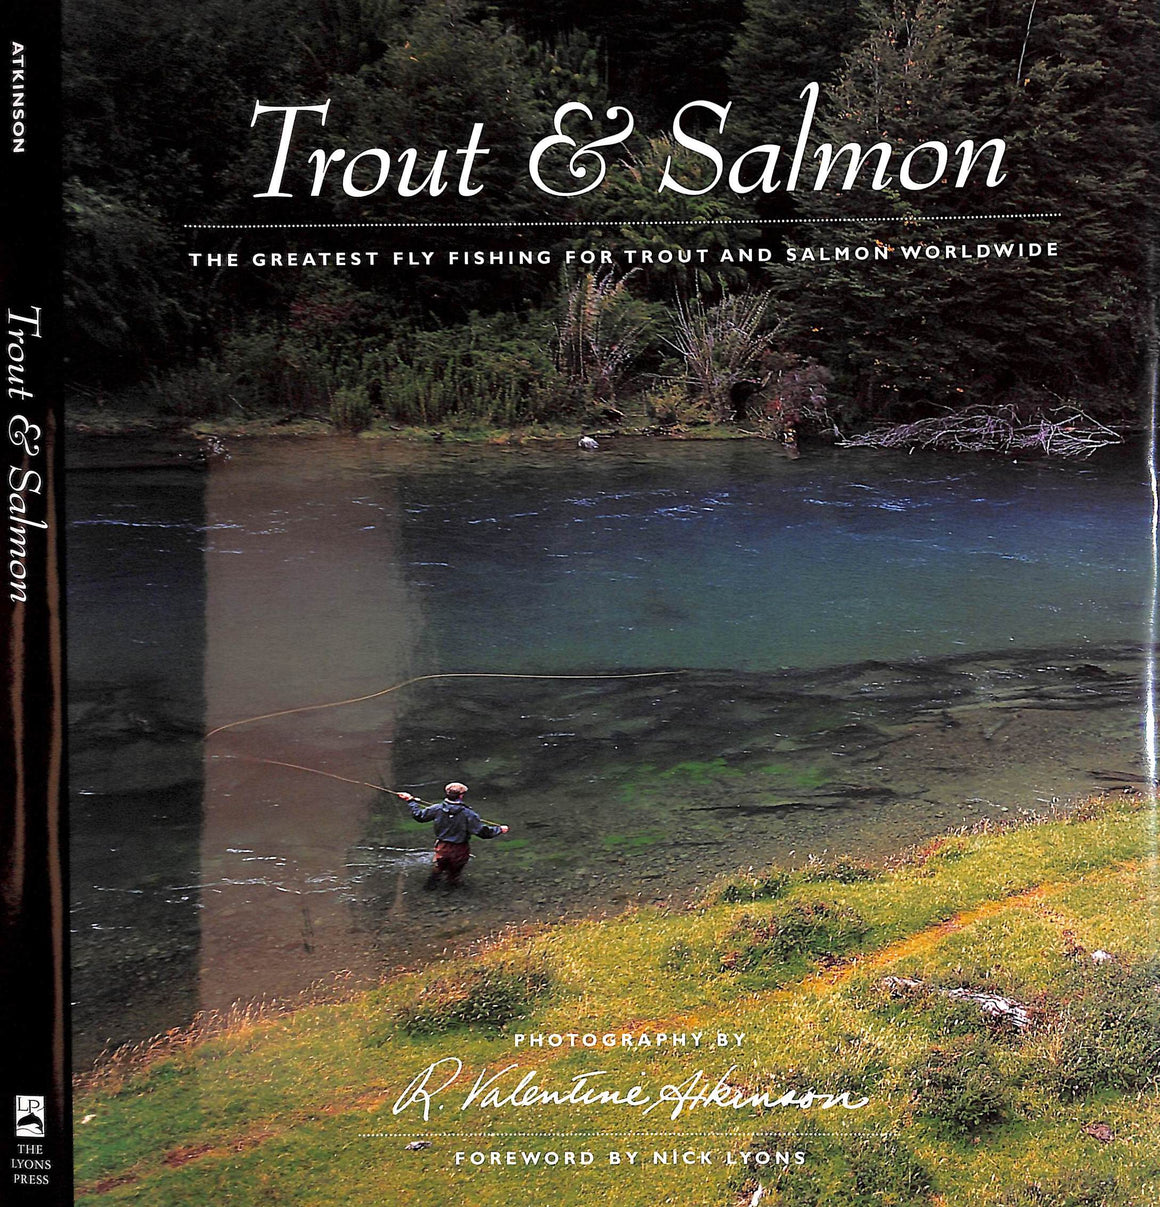 "Trout And Salmon" 1999 ATKINSON, R. Valentine